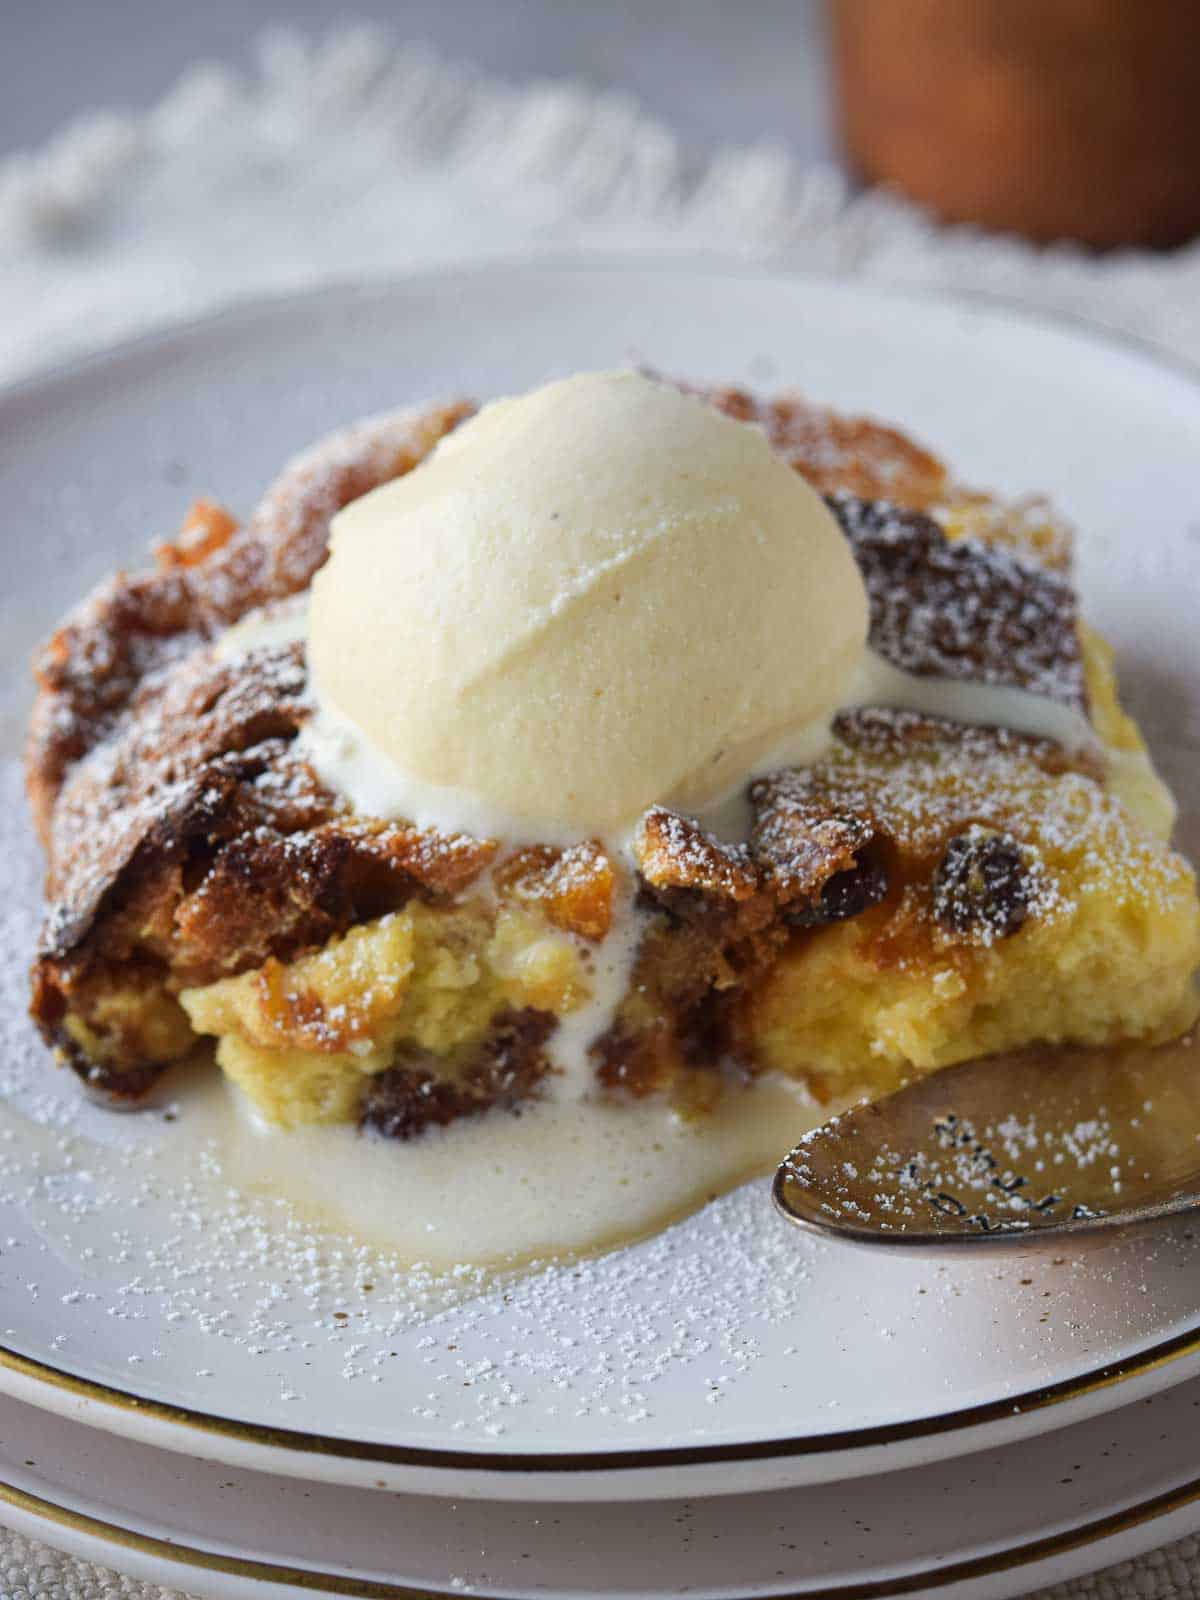 Close-up of panettone bread pudding with a scoop of vanilla ice cream on top.